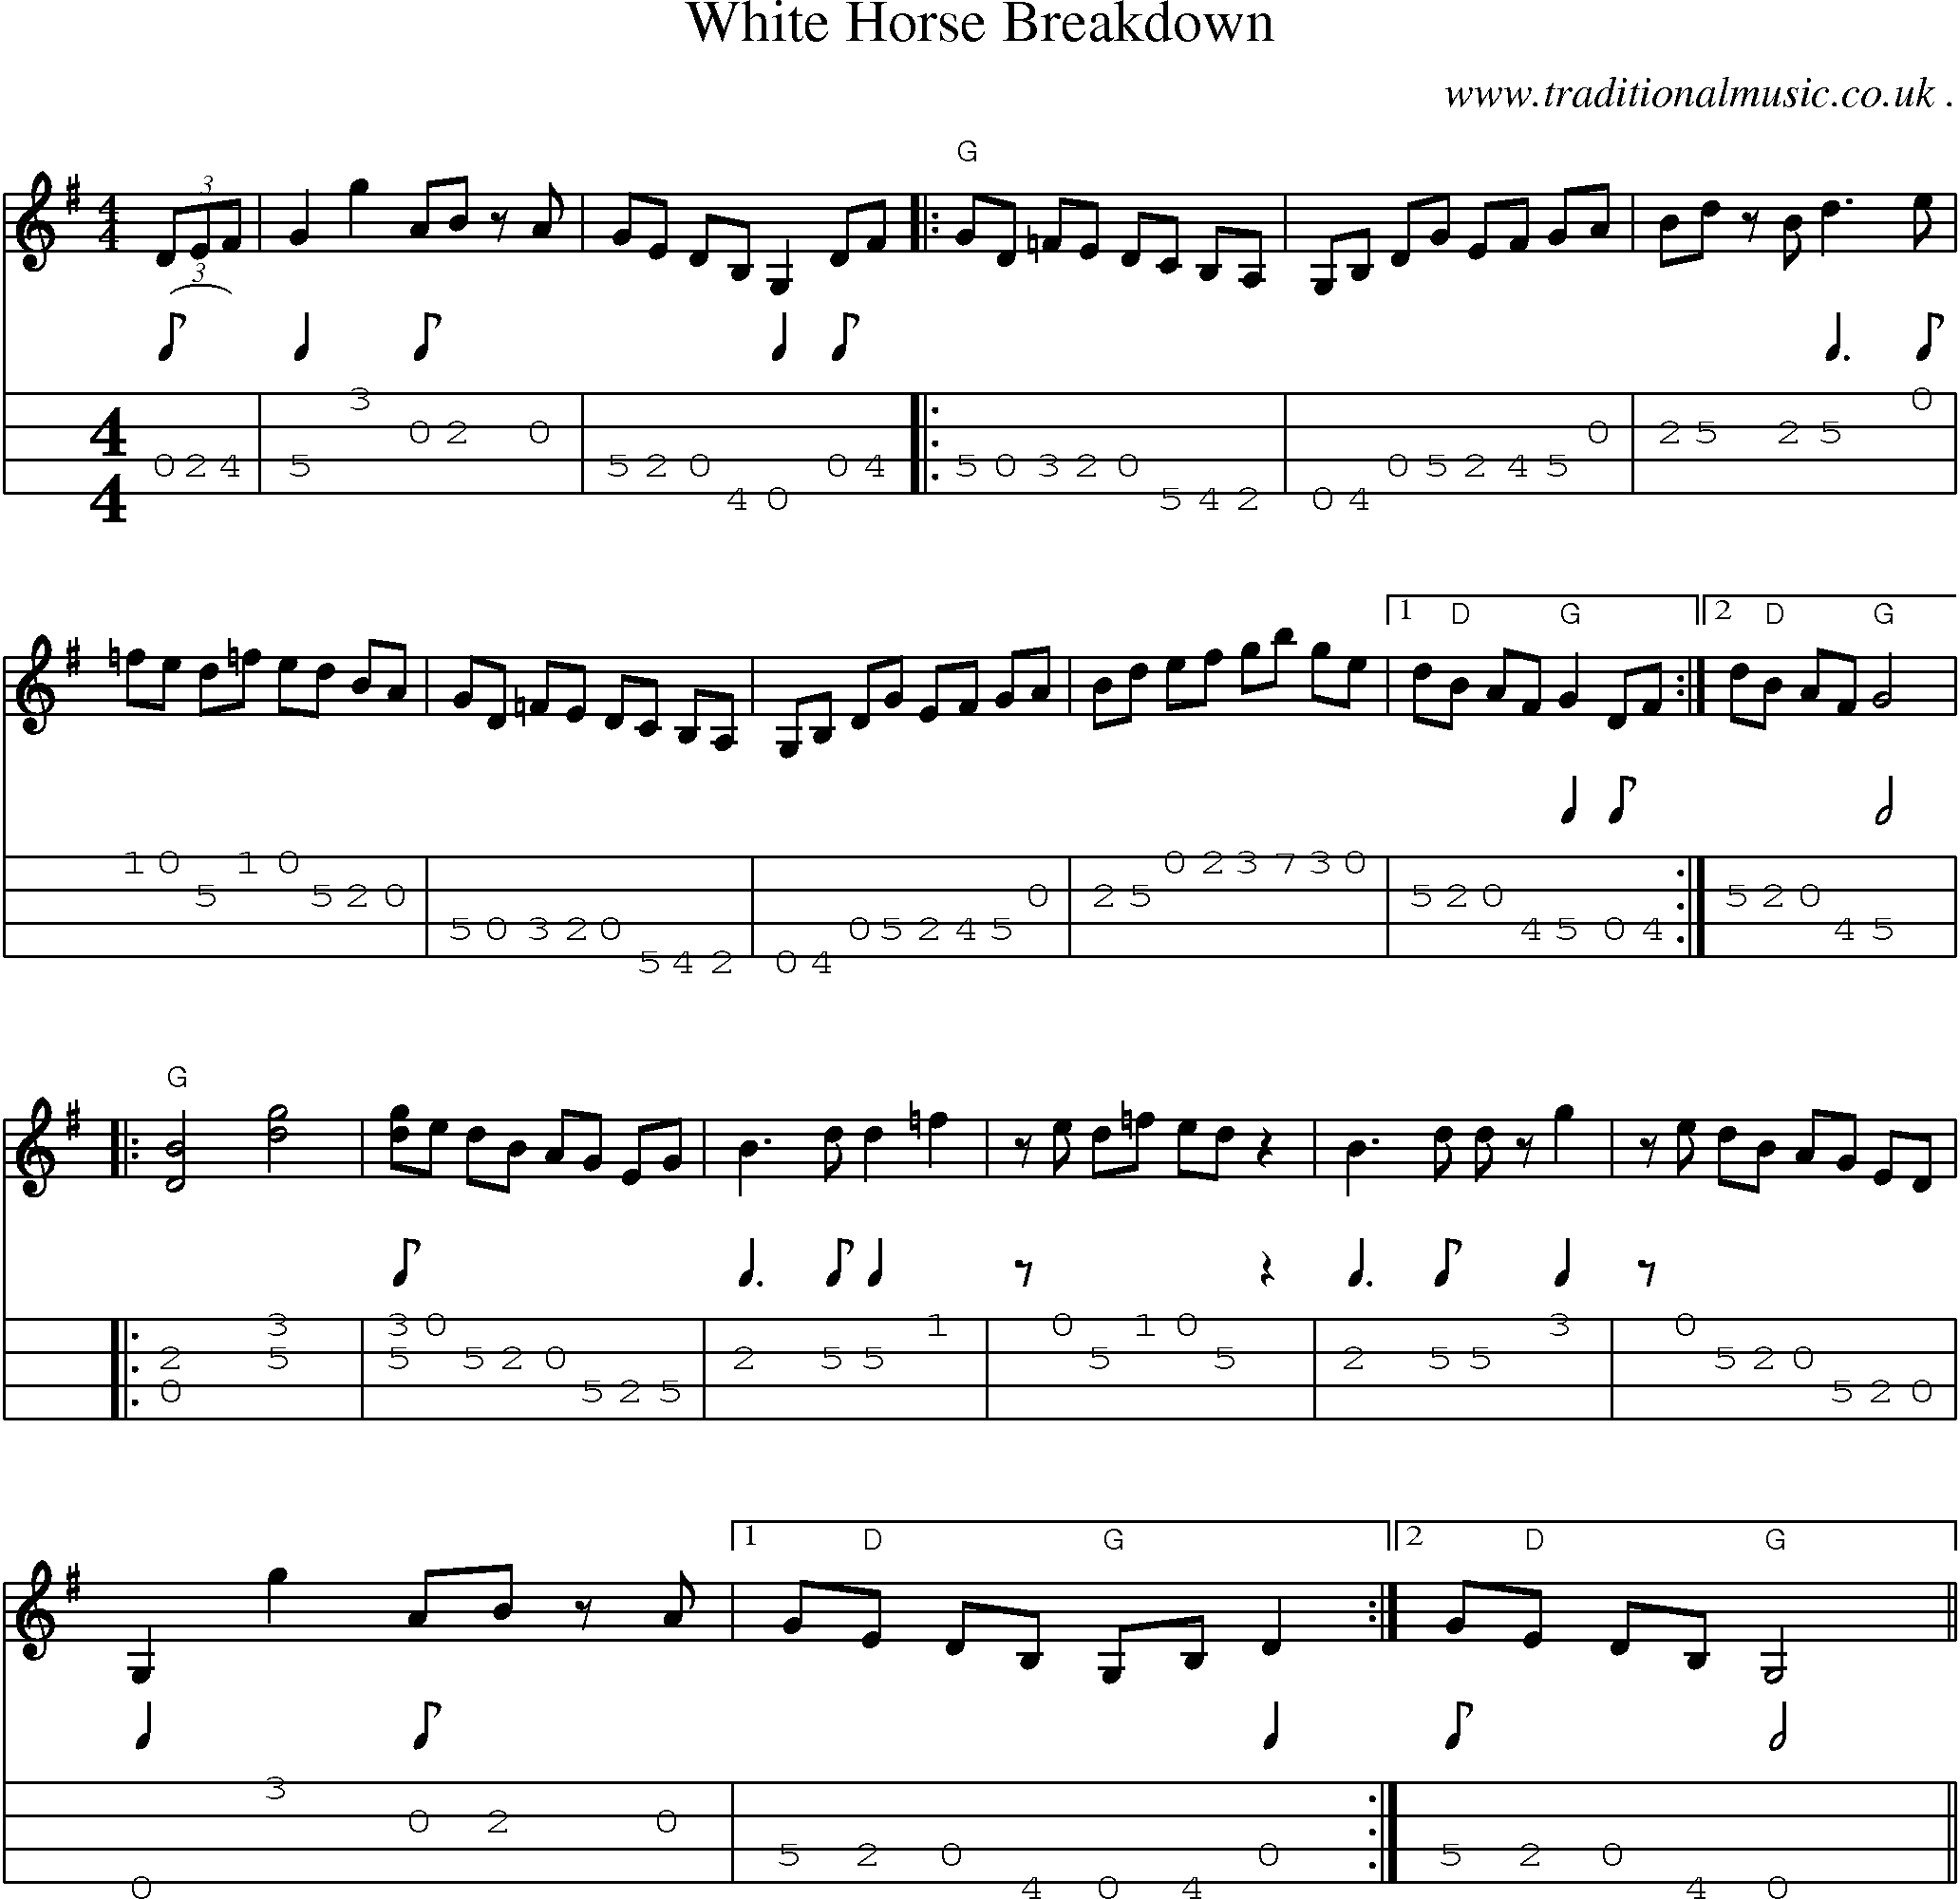 Music Score and Guitar Tabs for White Horse Breakdown